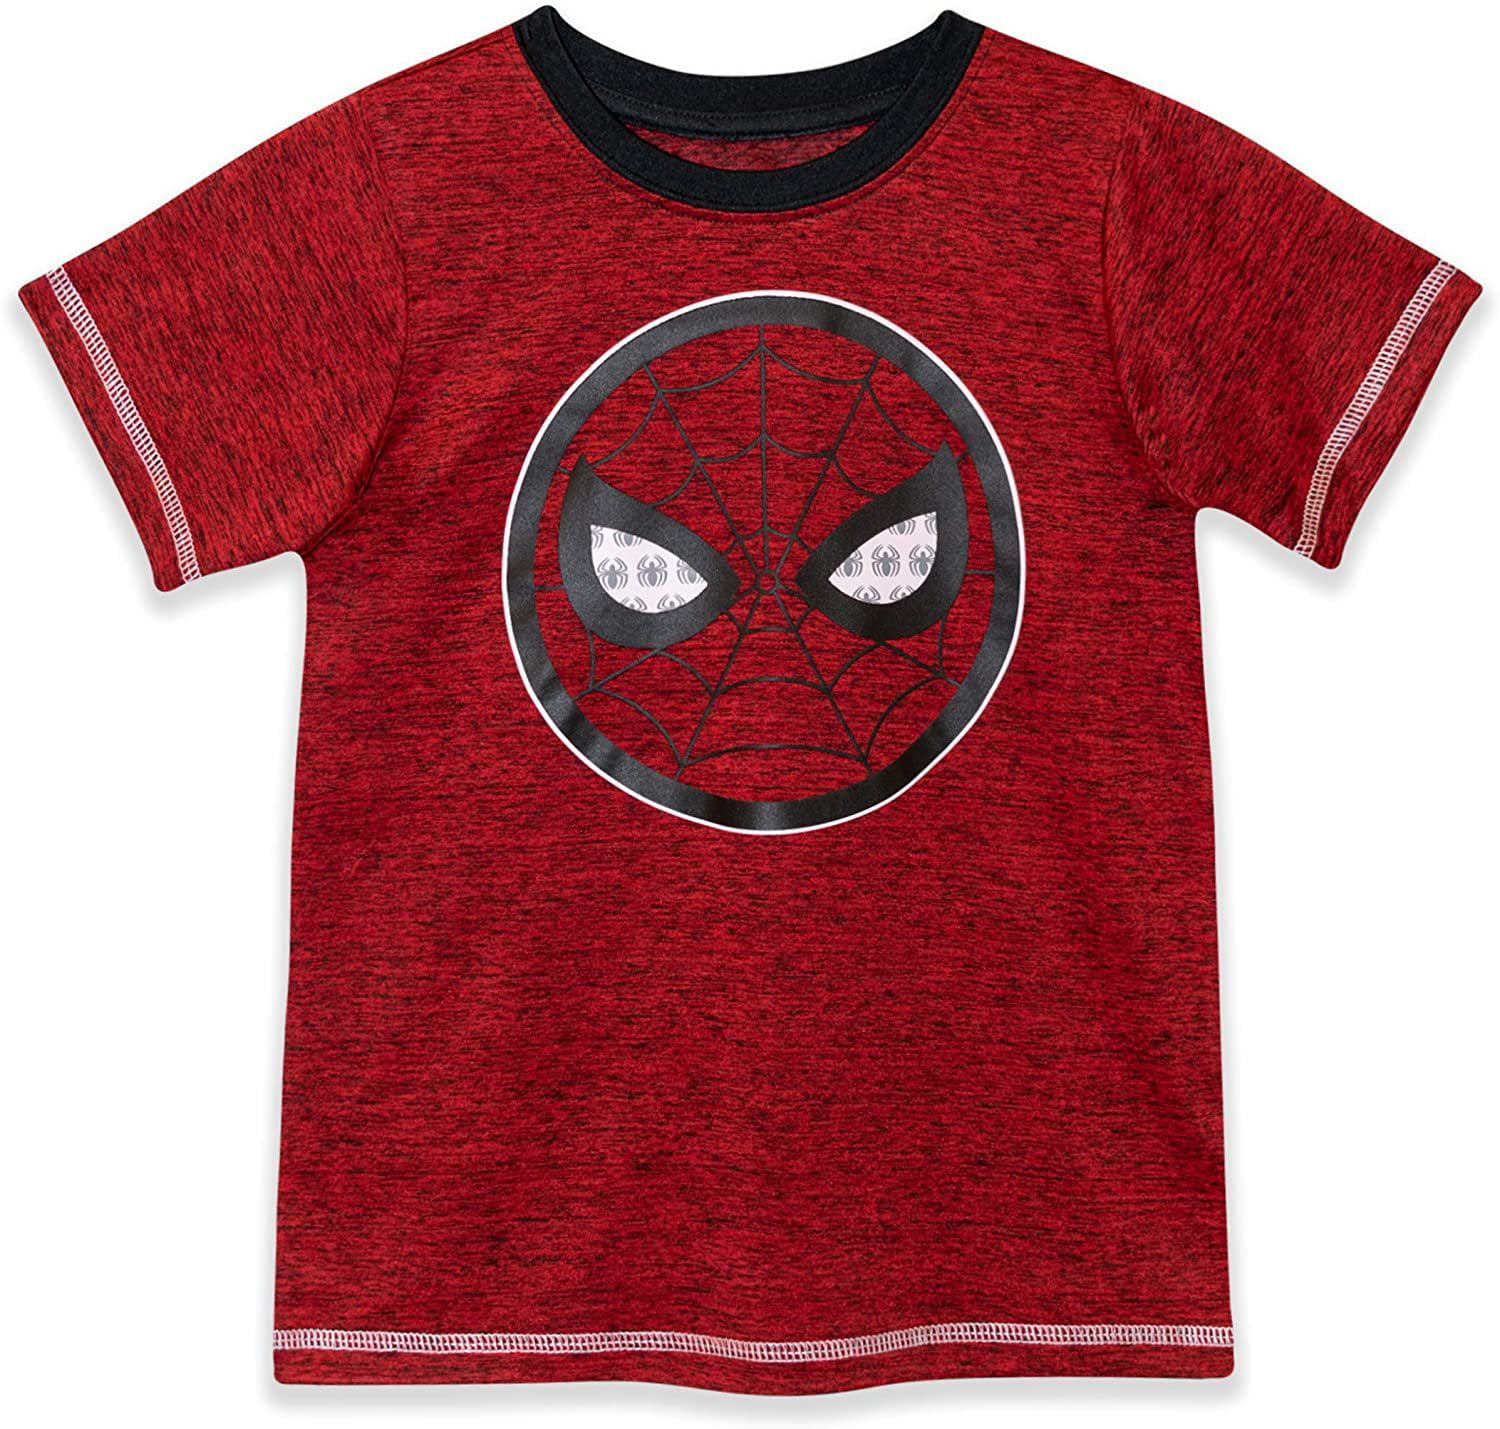 Avengers Marvel and Spiderman Superhero Shirts 3-Pack for Boys and Toddlers 